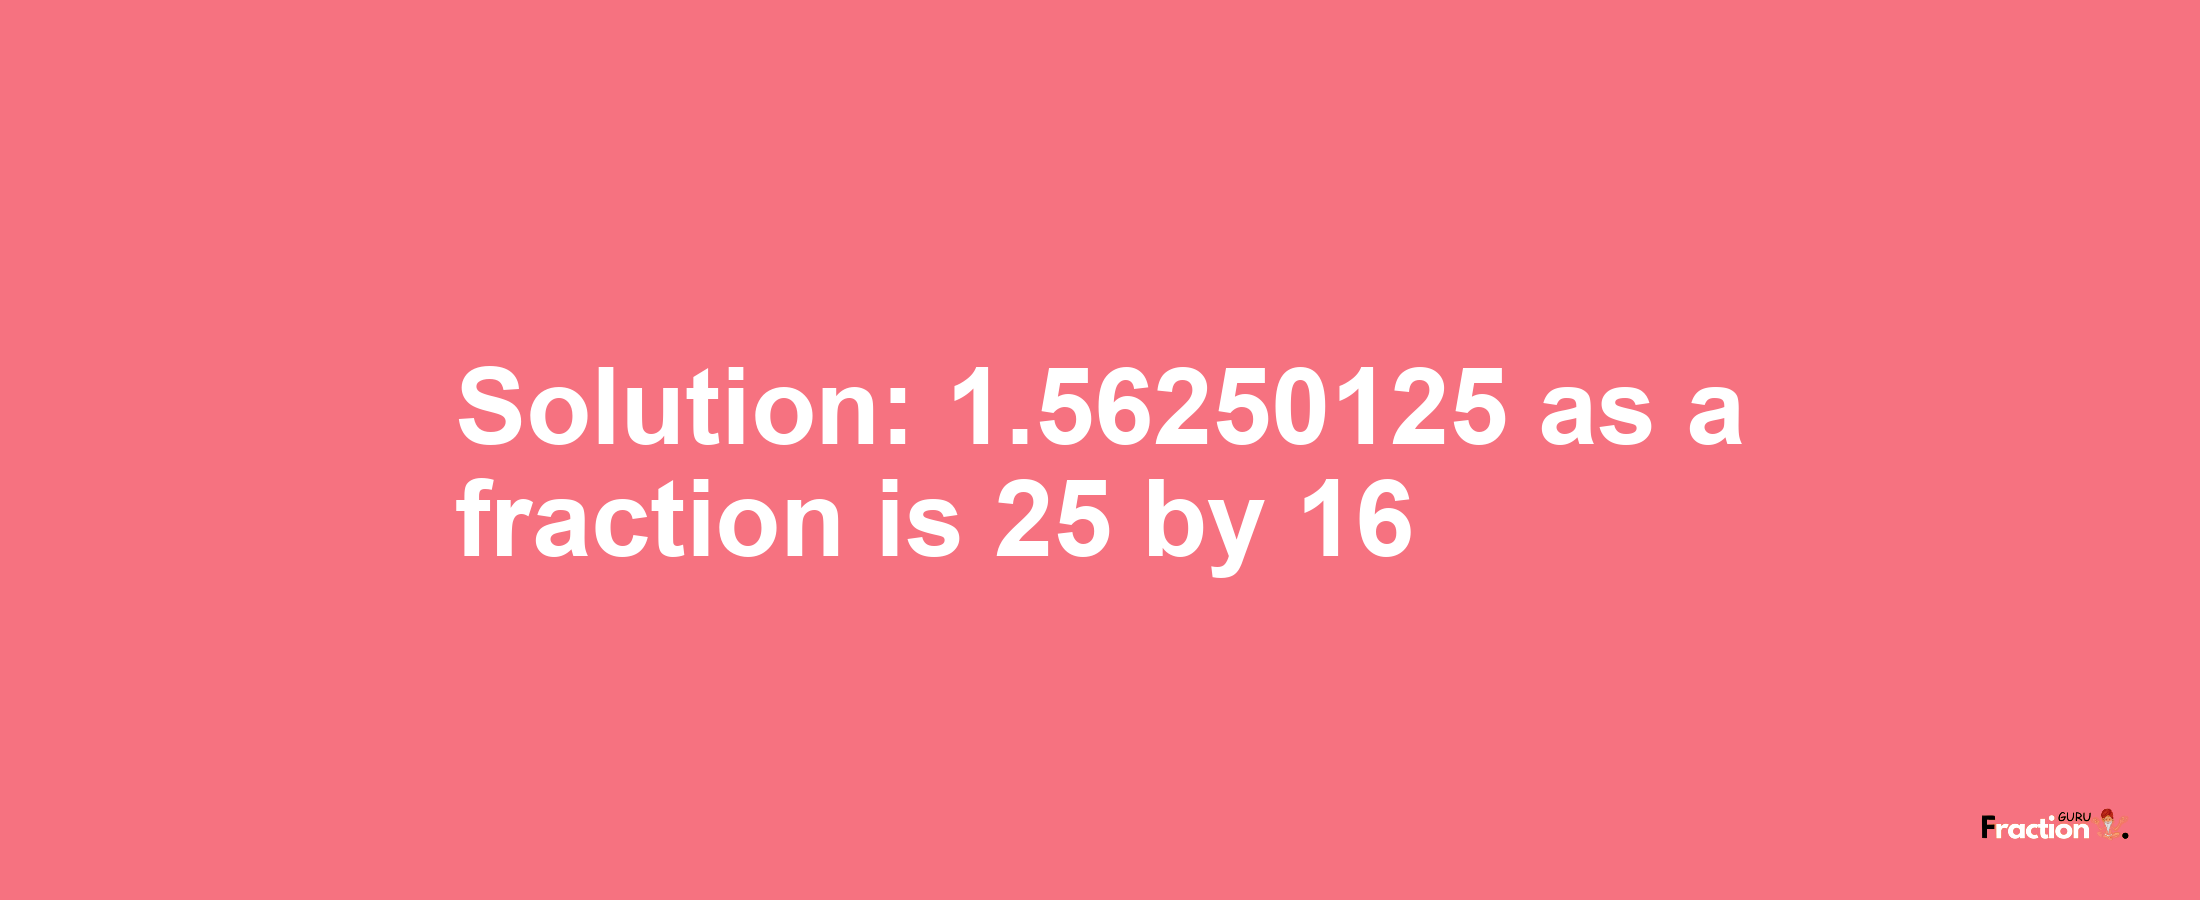 Solution:1.56250125 as a fraction is 25/16